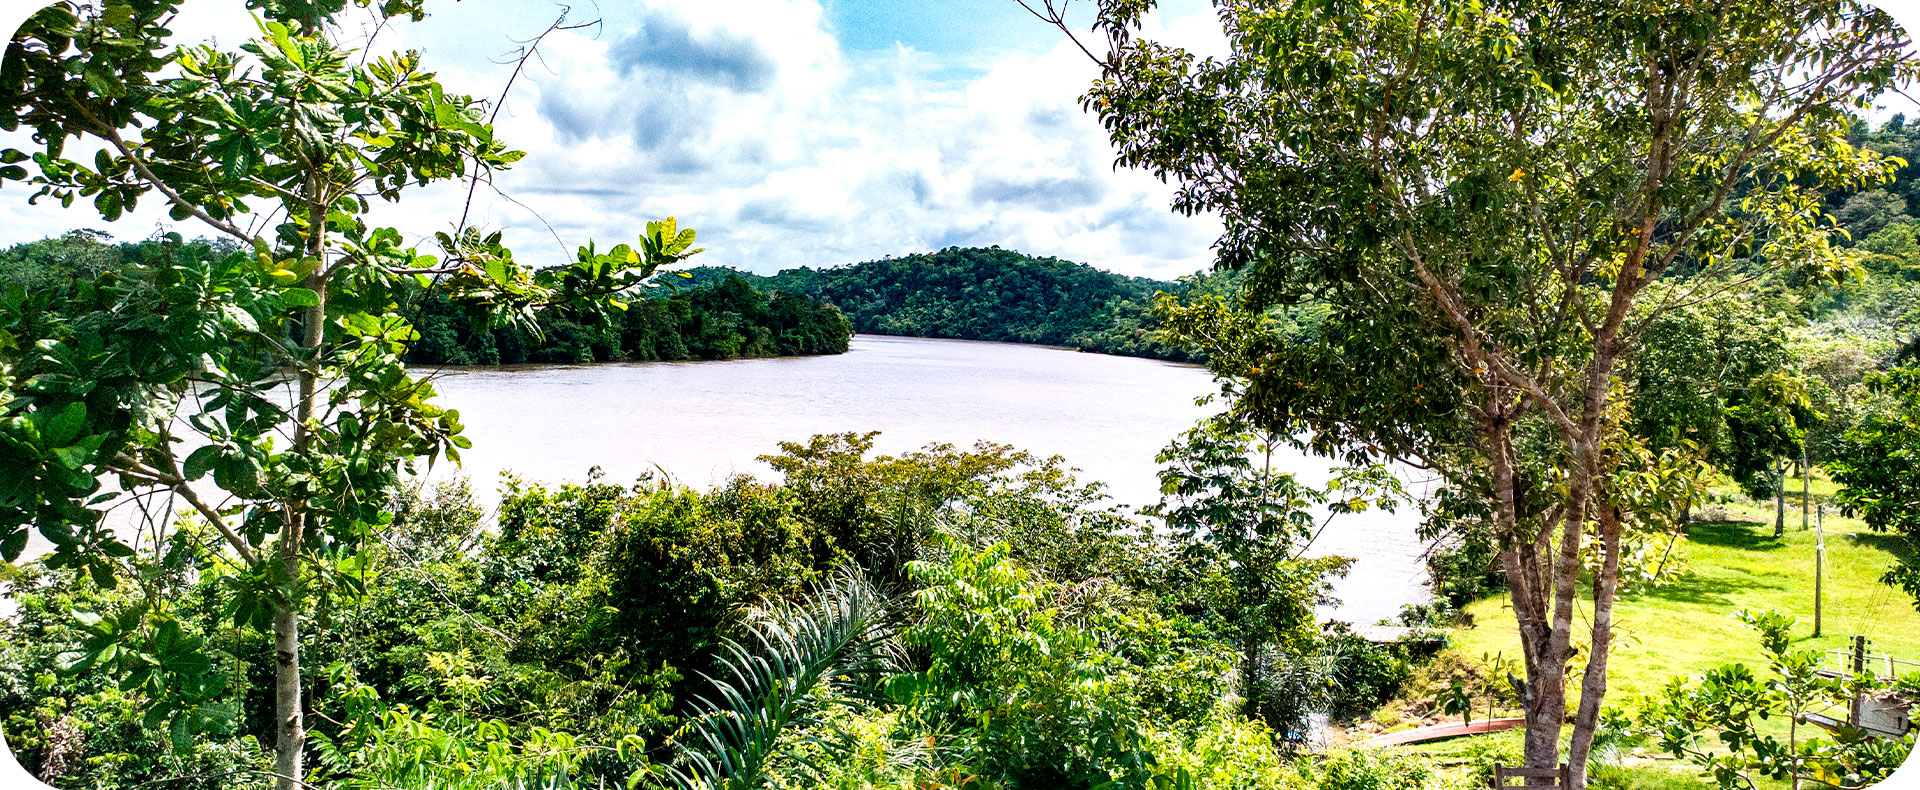 Paru River, in the community of Cafezal, a conserved forest area of the Jari Pará REDD+ Project